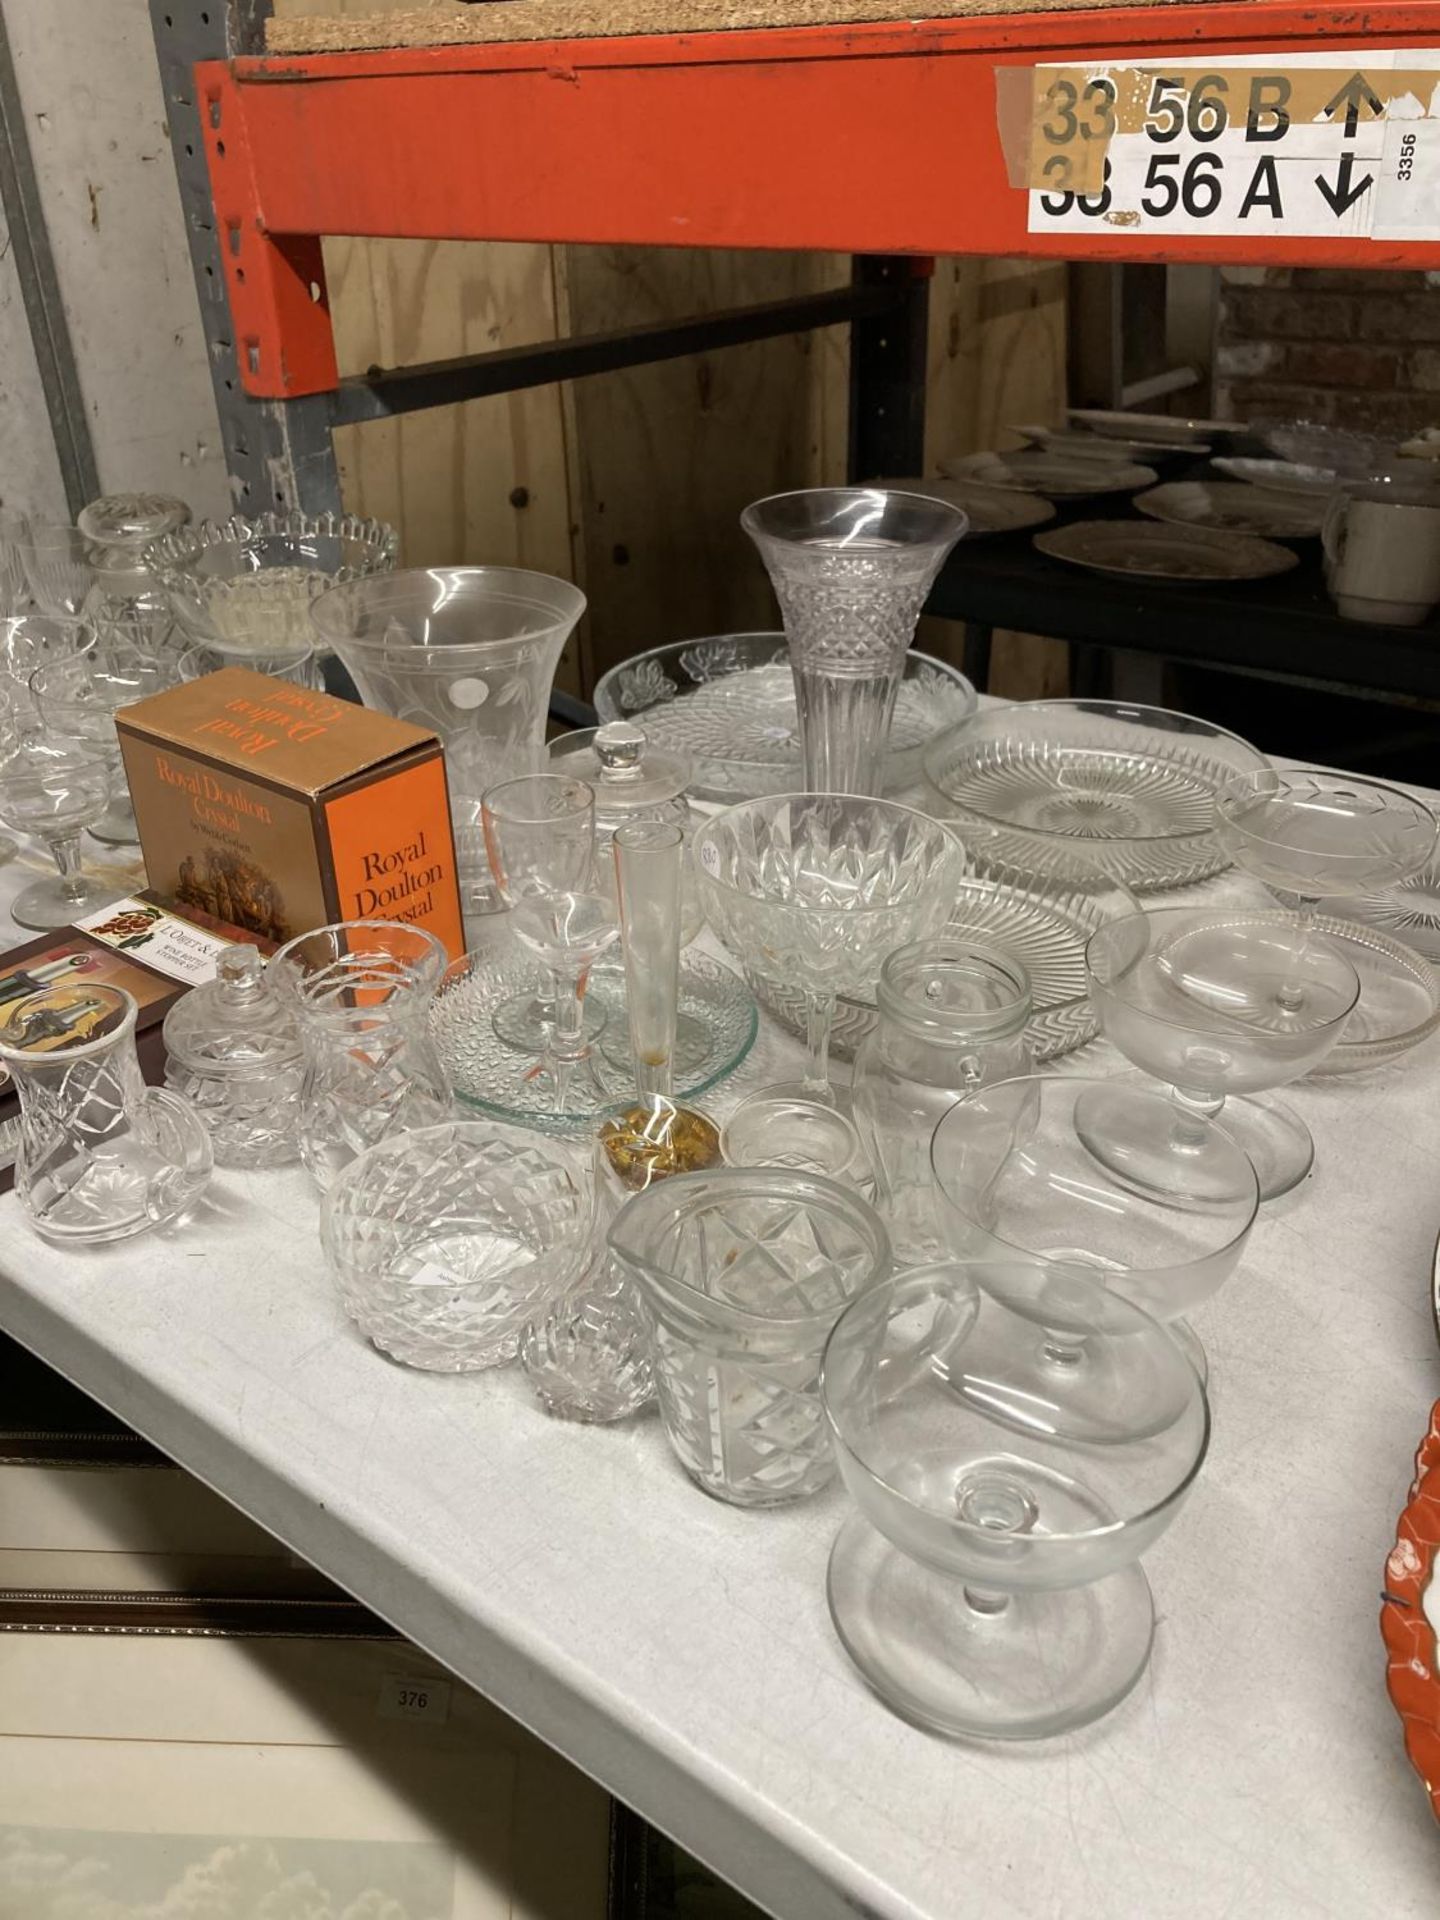 A QUANTITY OF VINTAGE GLASSWARE TO INCLUDE BOWLS, VASES, DESSERT DISHES, LIDDED POTS, GLASSES, ETC - Image 4 of 4